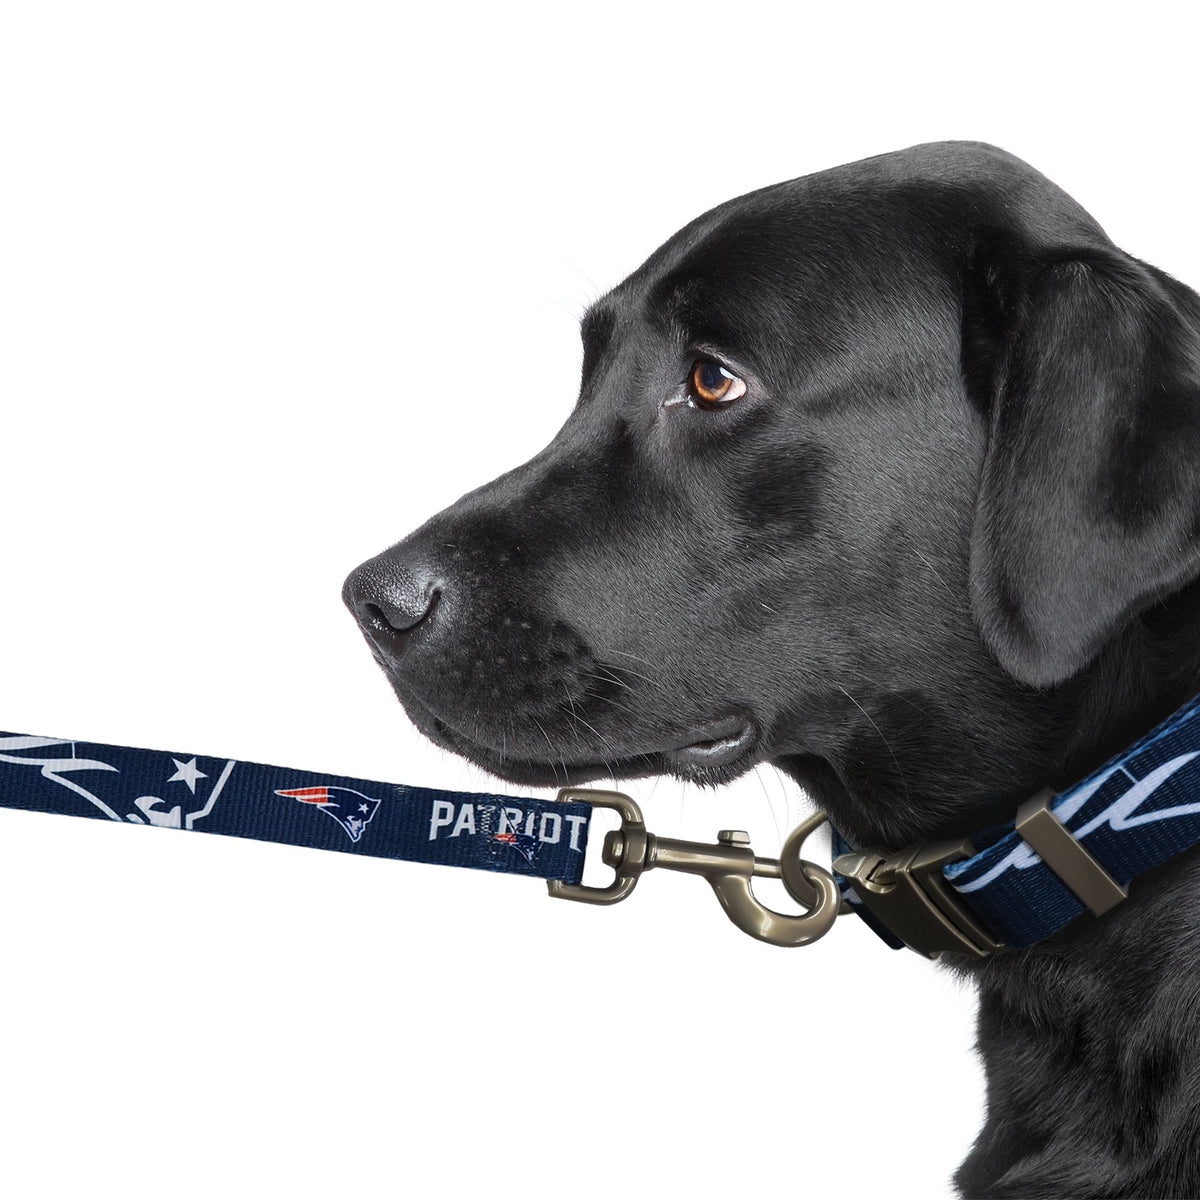 New York Mets Dog Collars, Leashes, ID Tags, Jerseys & More